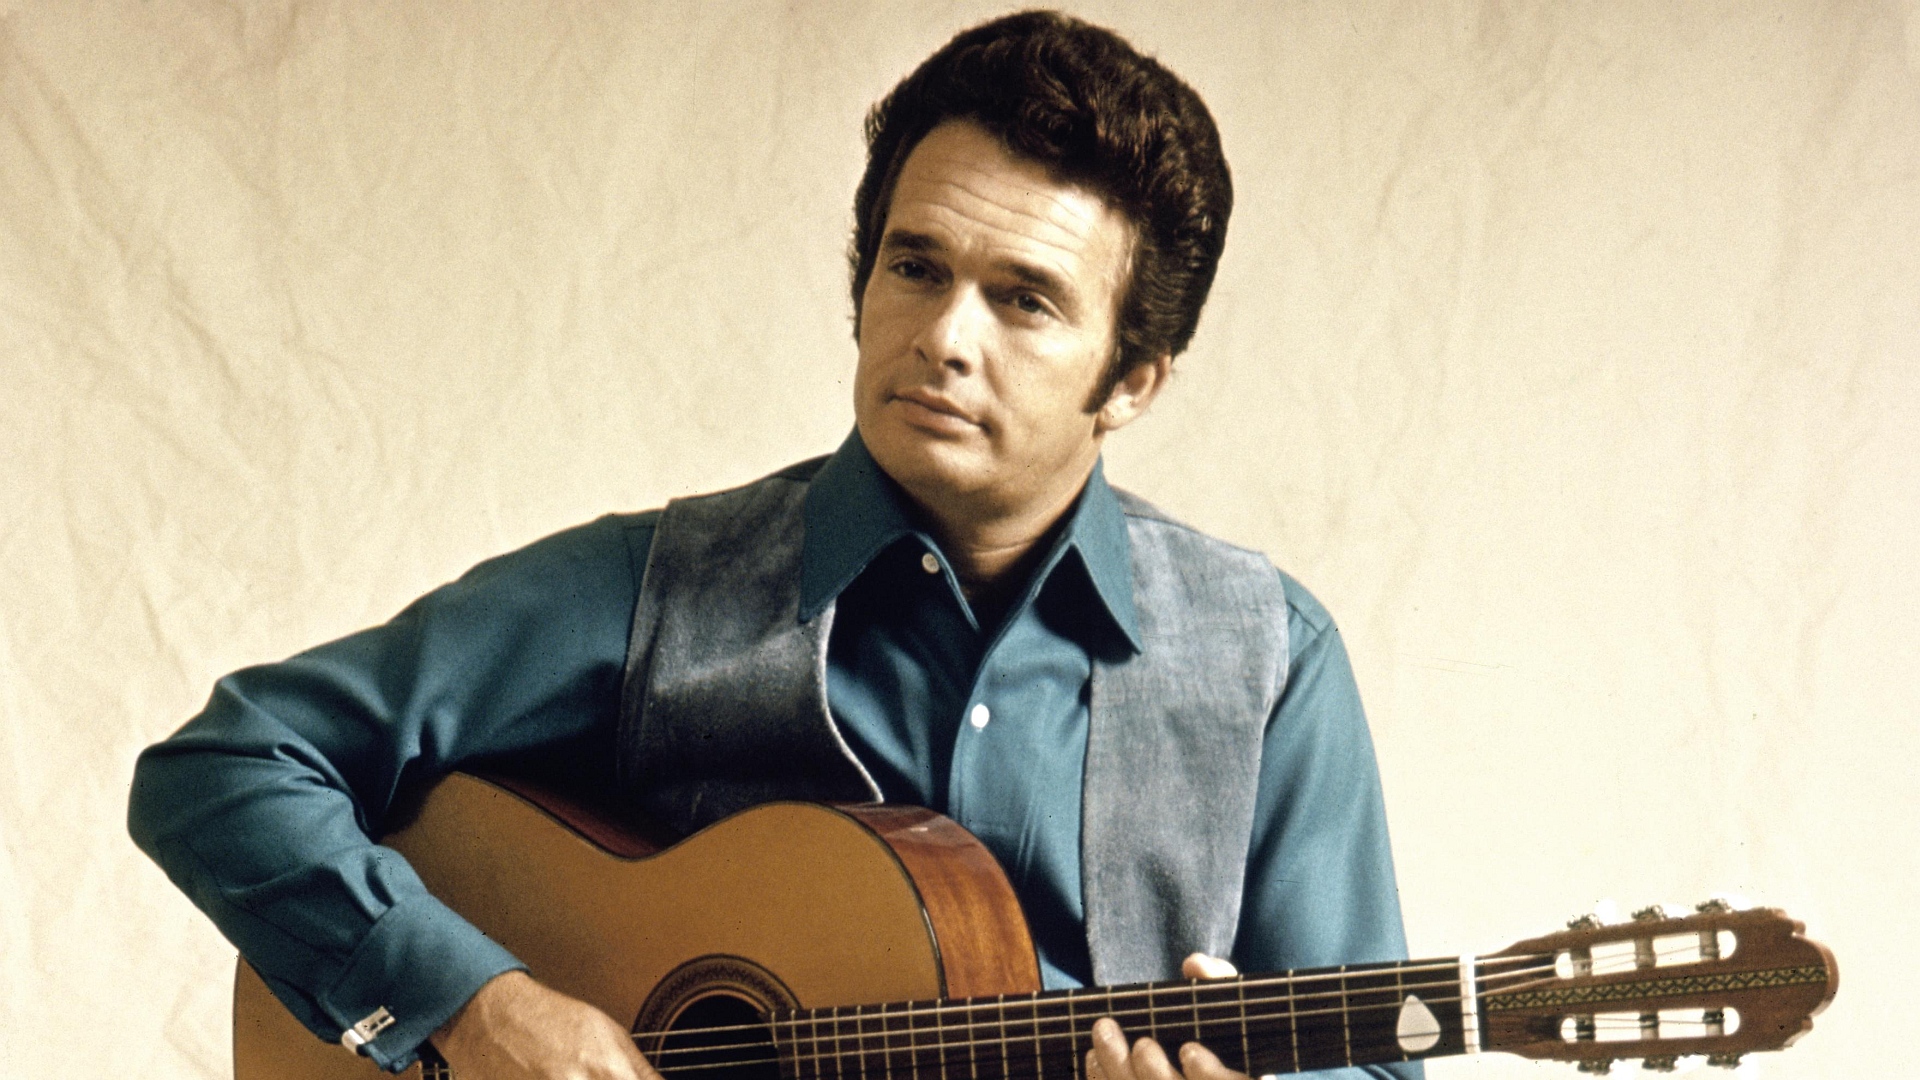 Merle Haggard Image Thecelebritypix For